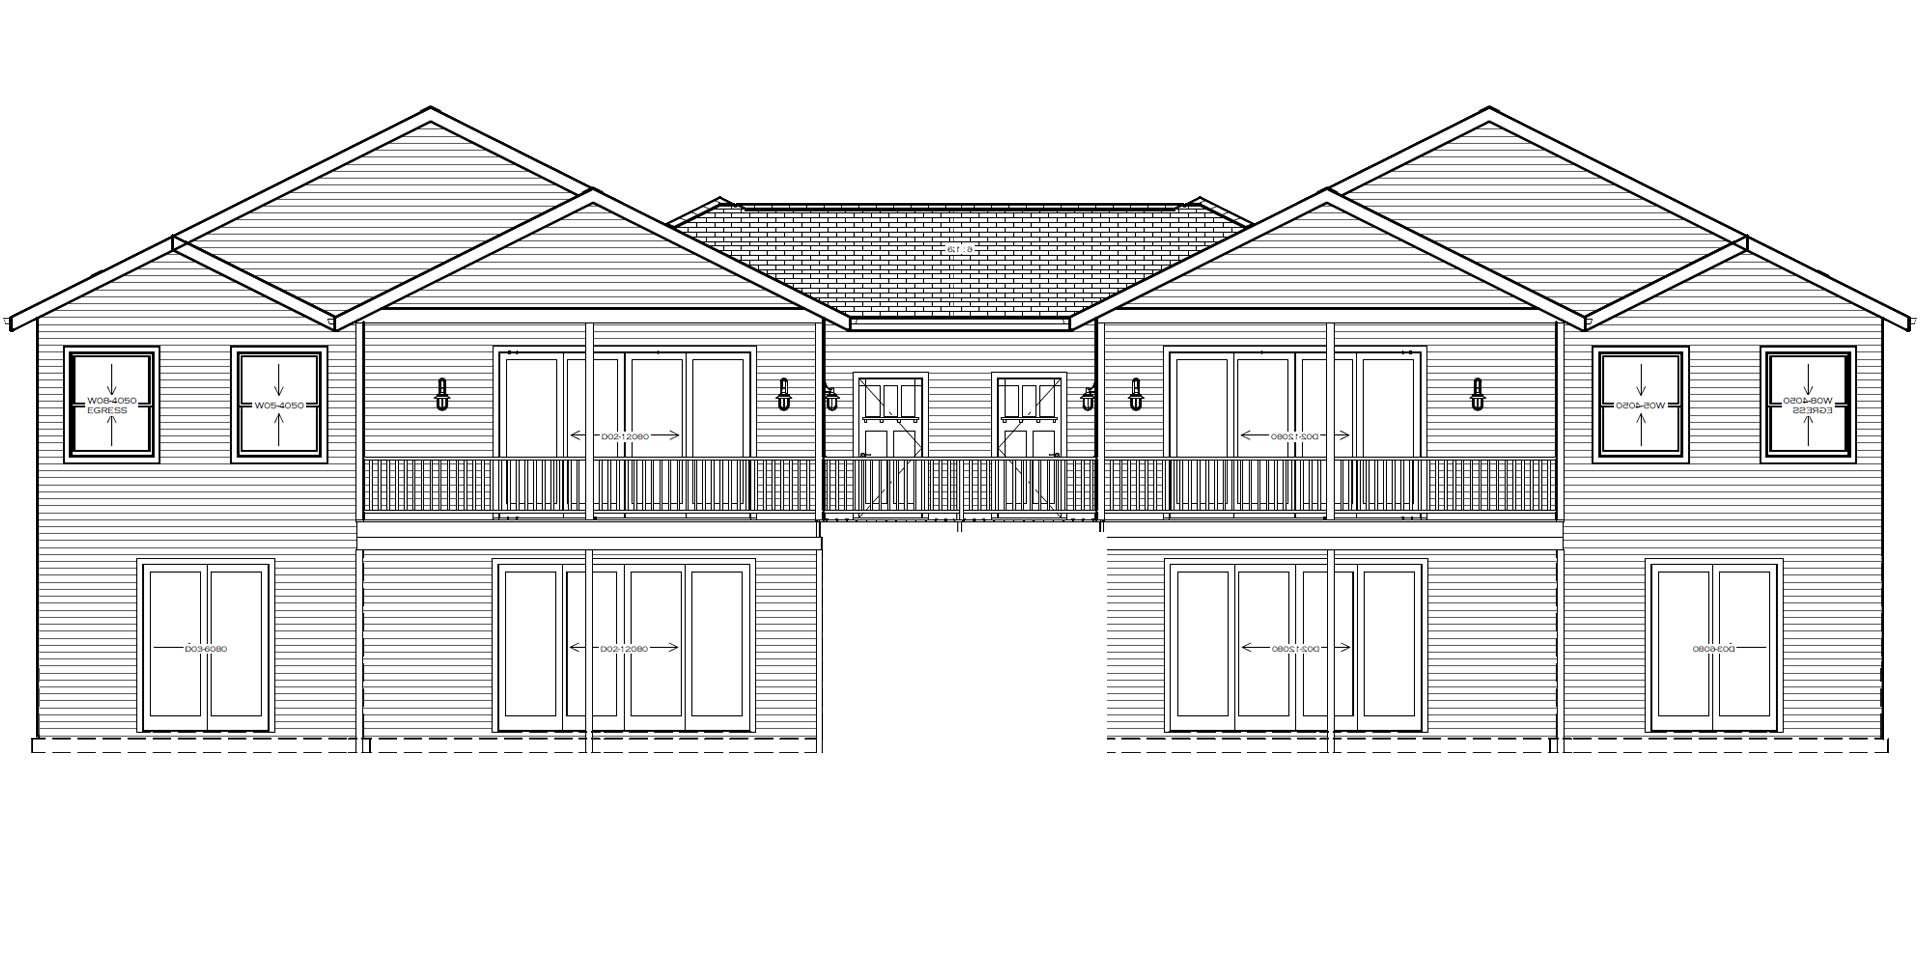 Waterfront house rendering - rear view